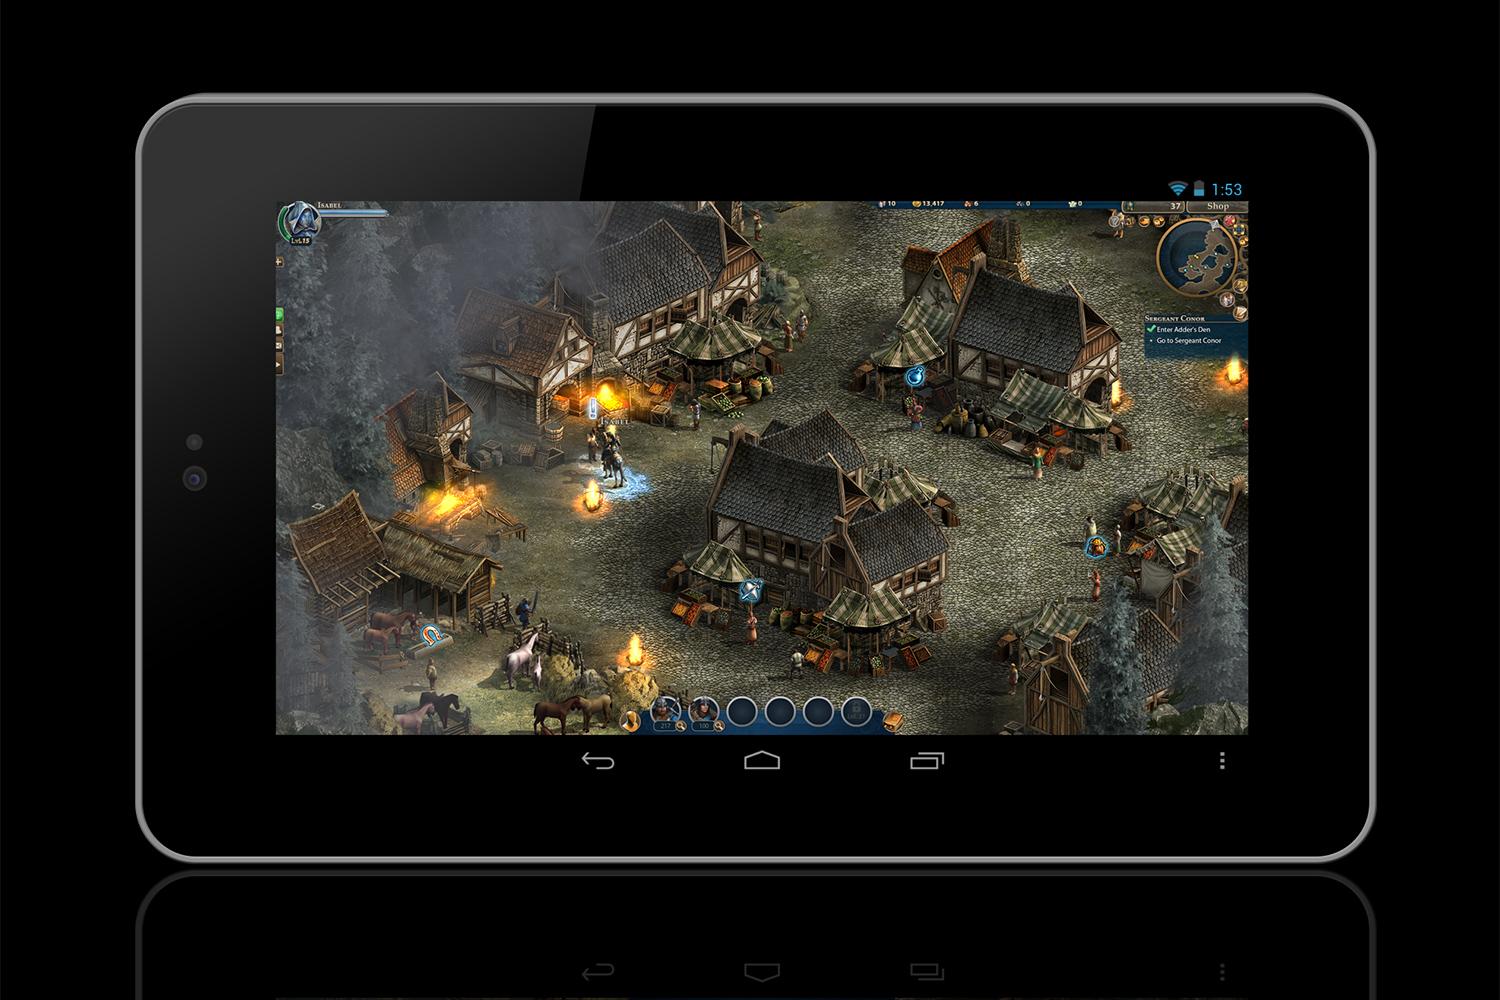 How to Play PC Games on Android